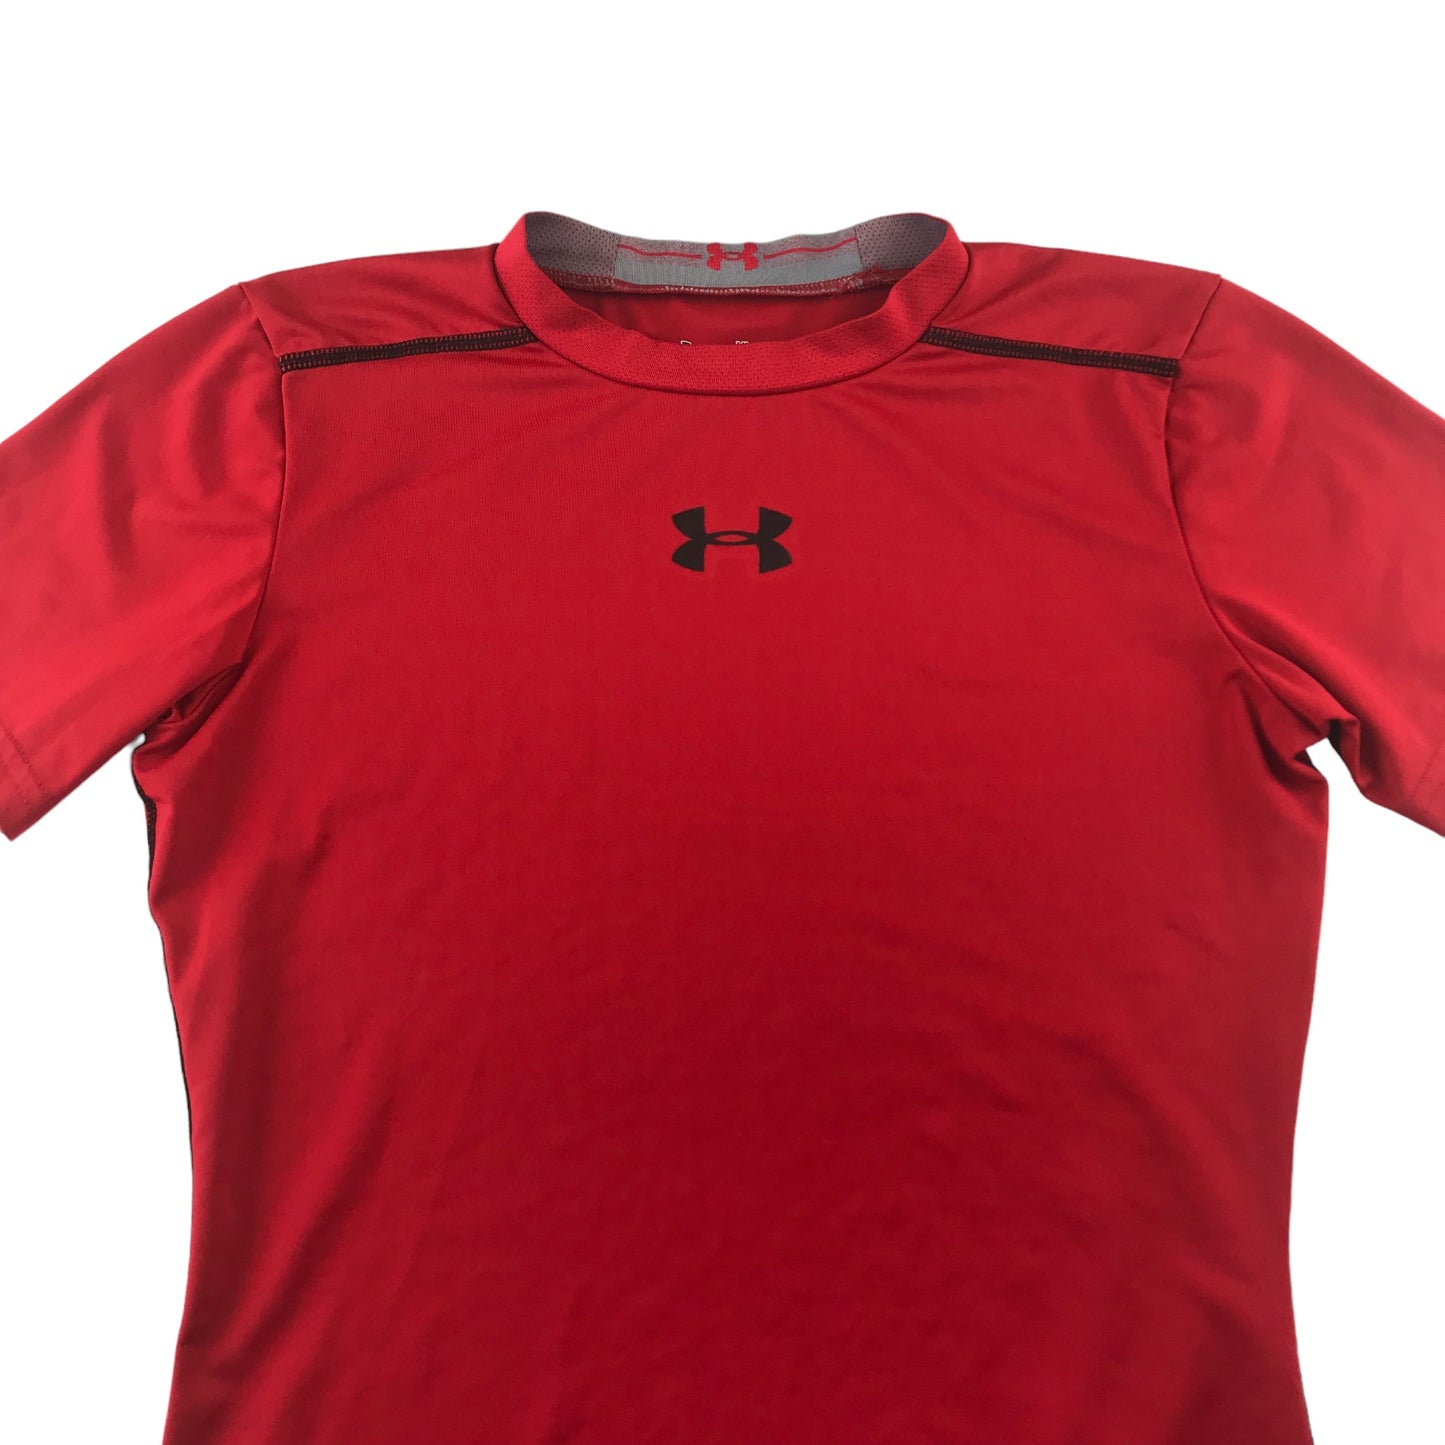 Under Armour Sports Top Age 14-16 Red Plain Short Sleeve